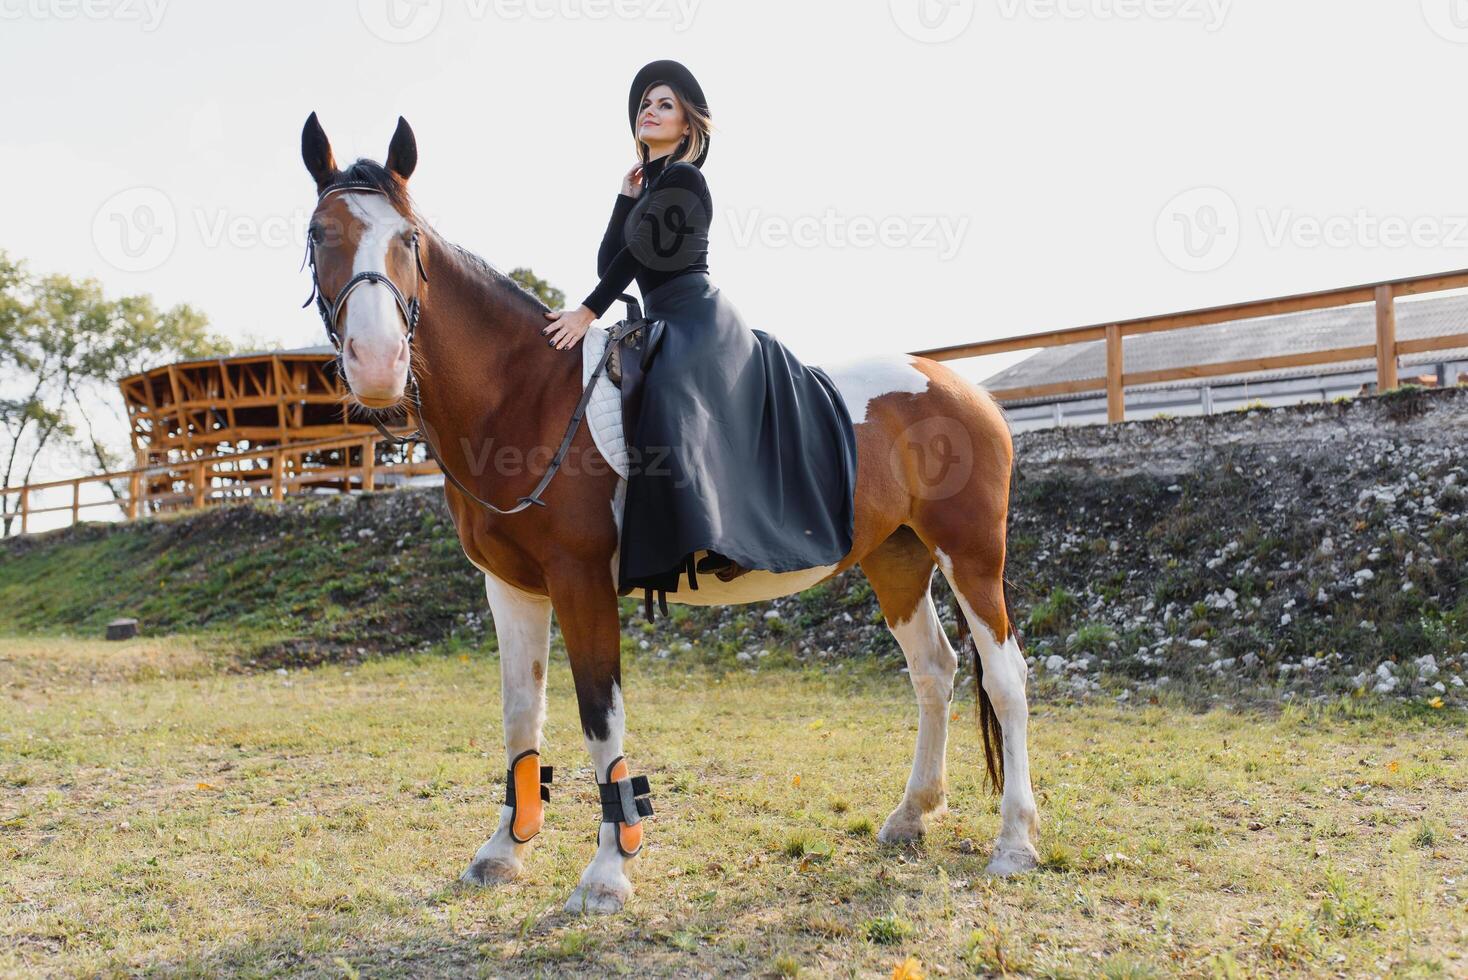 Fashionable portrait of a beautiful young woman and horse photo